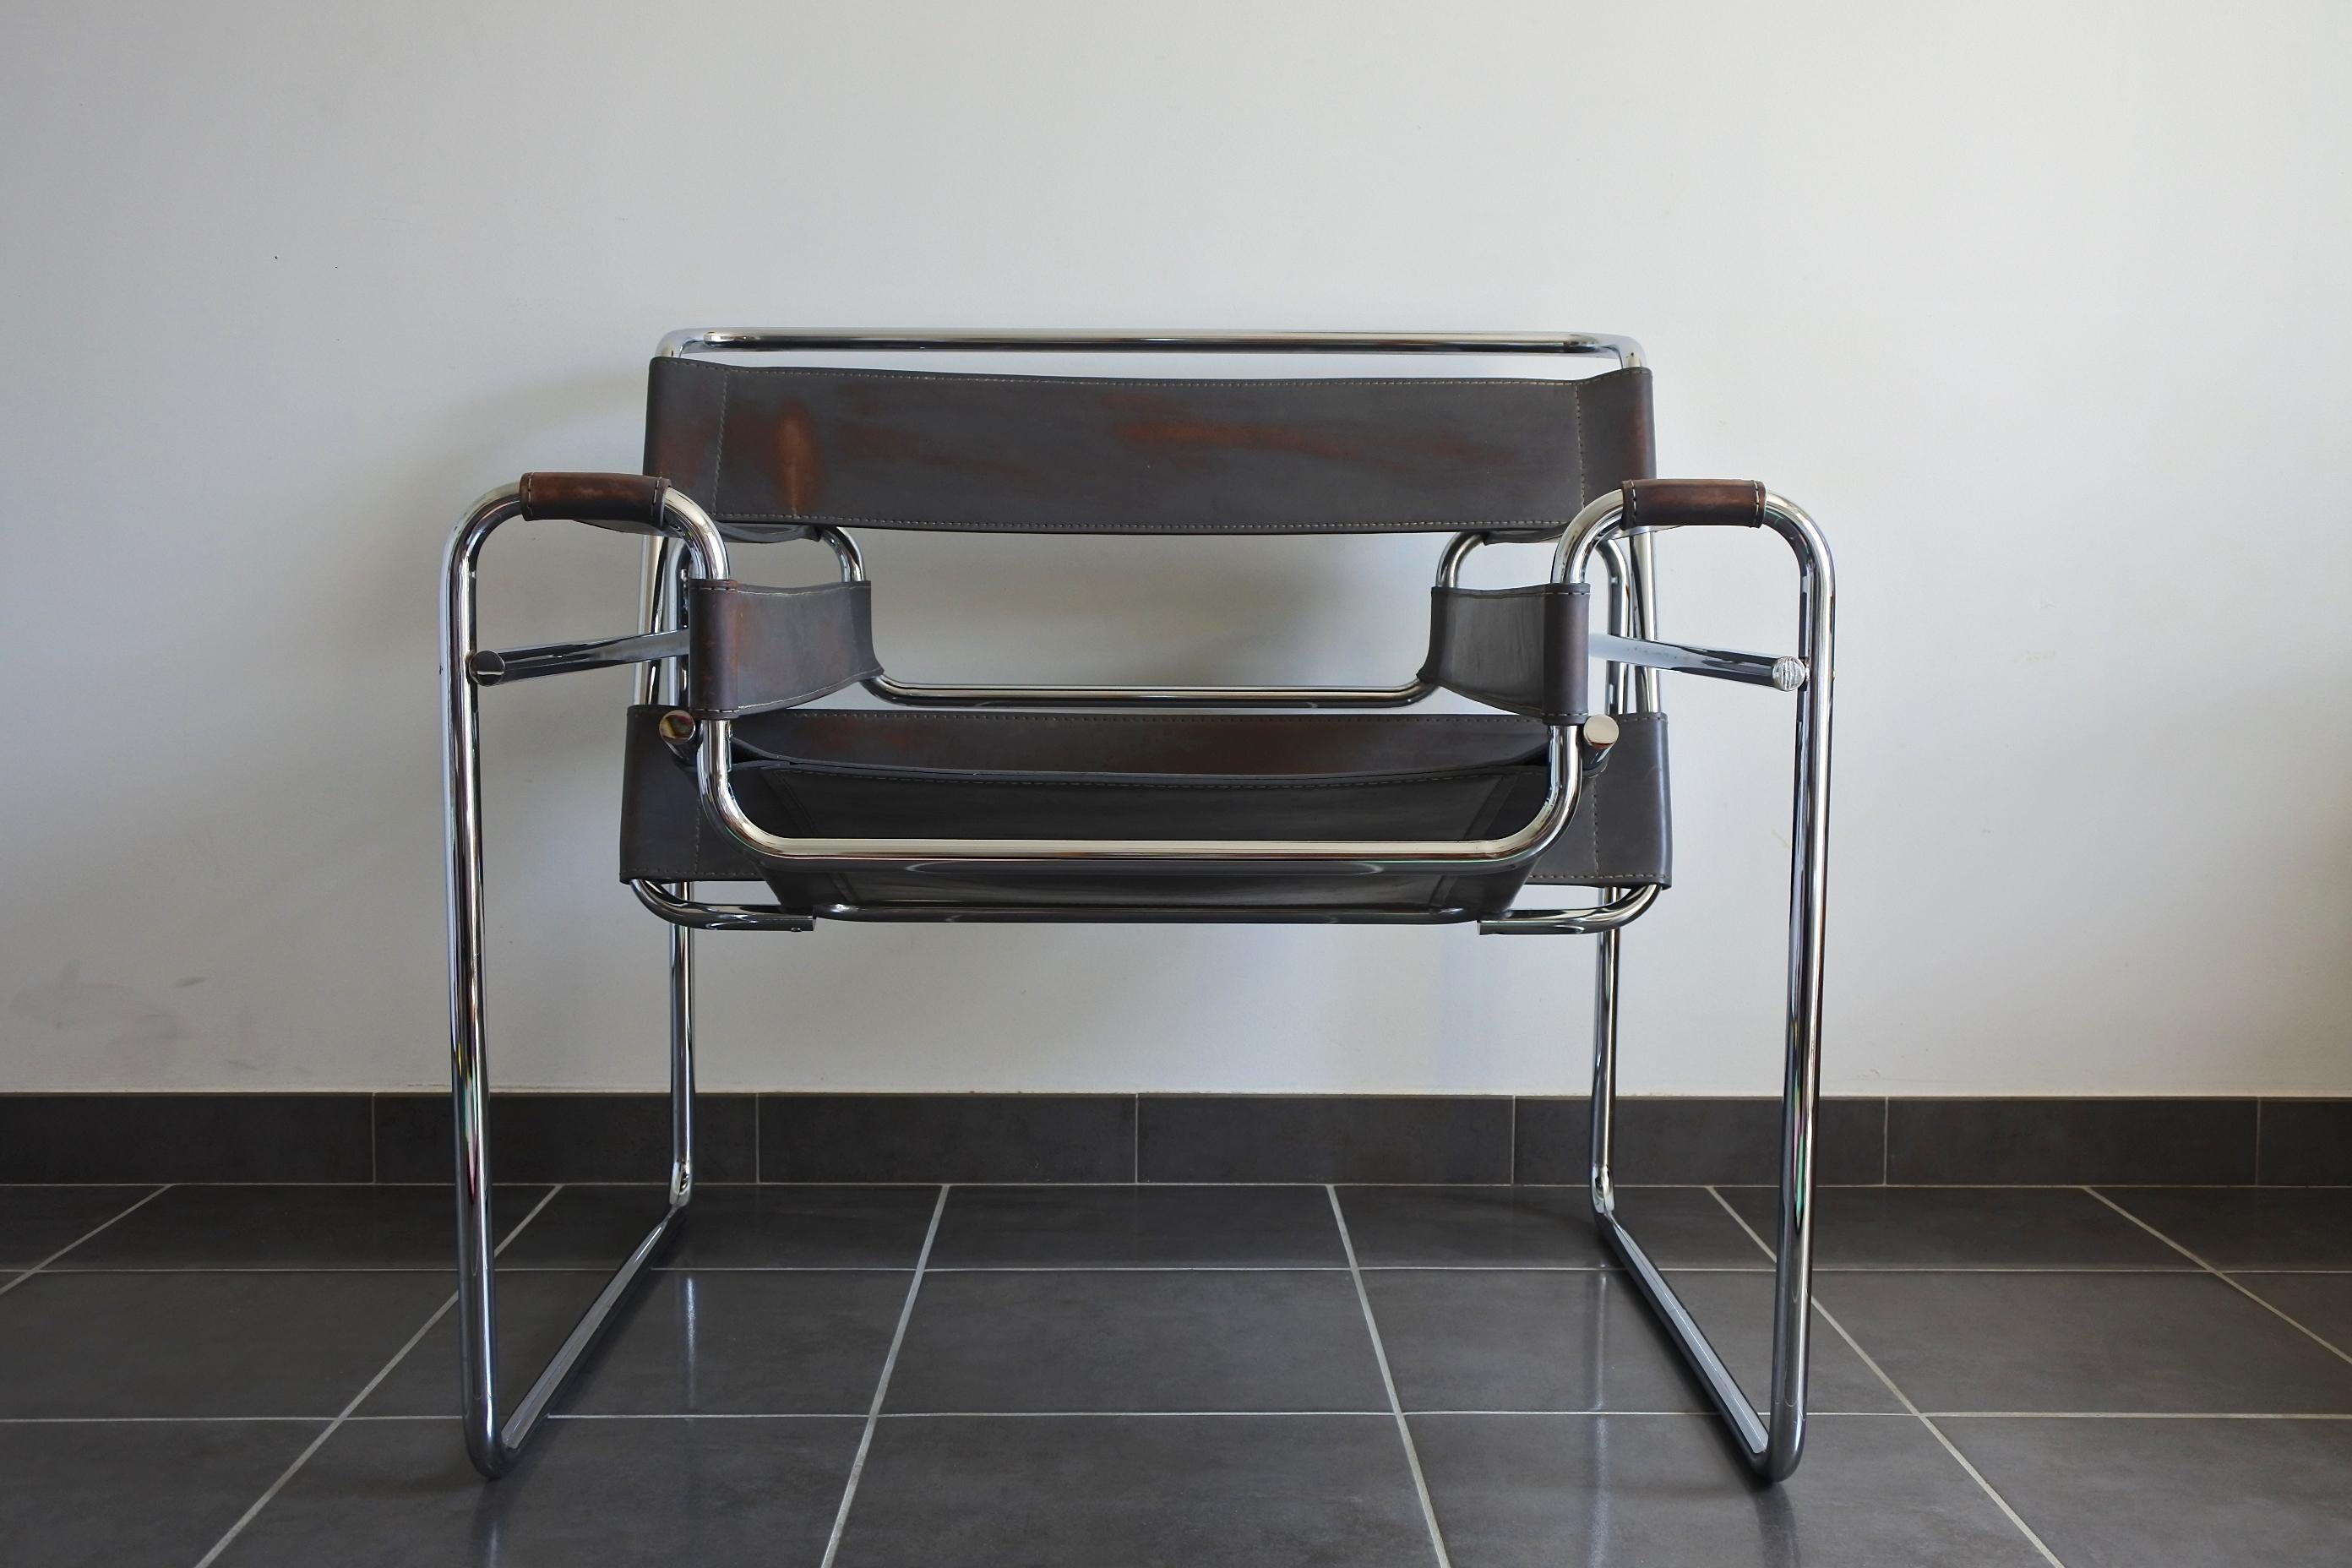 Wassily lounge chair Mod. B 3 designed by Marcel Breuer in the mid-1920s.
Licensed edition by Fasem Italy from the 1980s.
Chromed tubular steel frame and leather.
Signed and dated.

Great quality edition, Fasem edited numerous designers in the